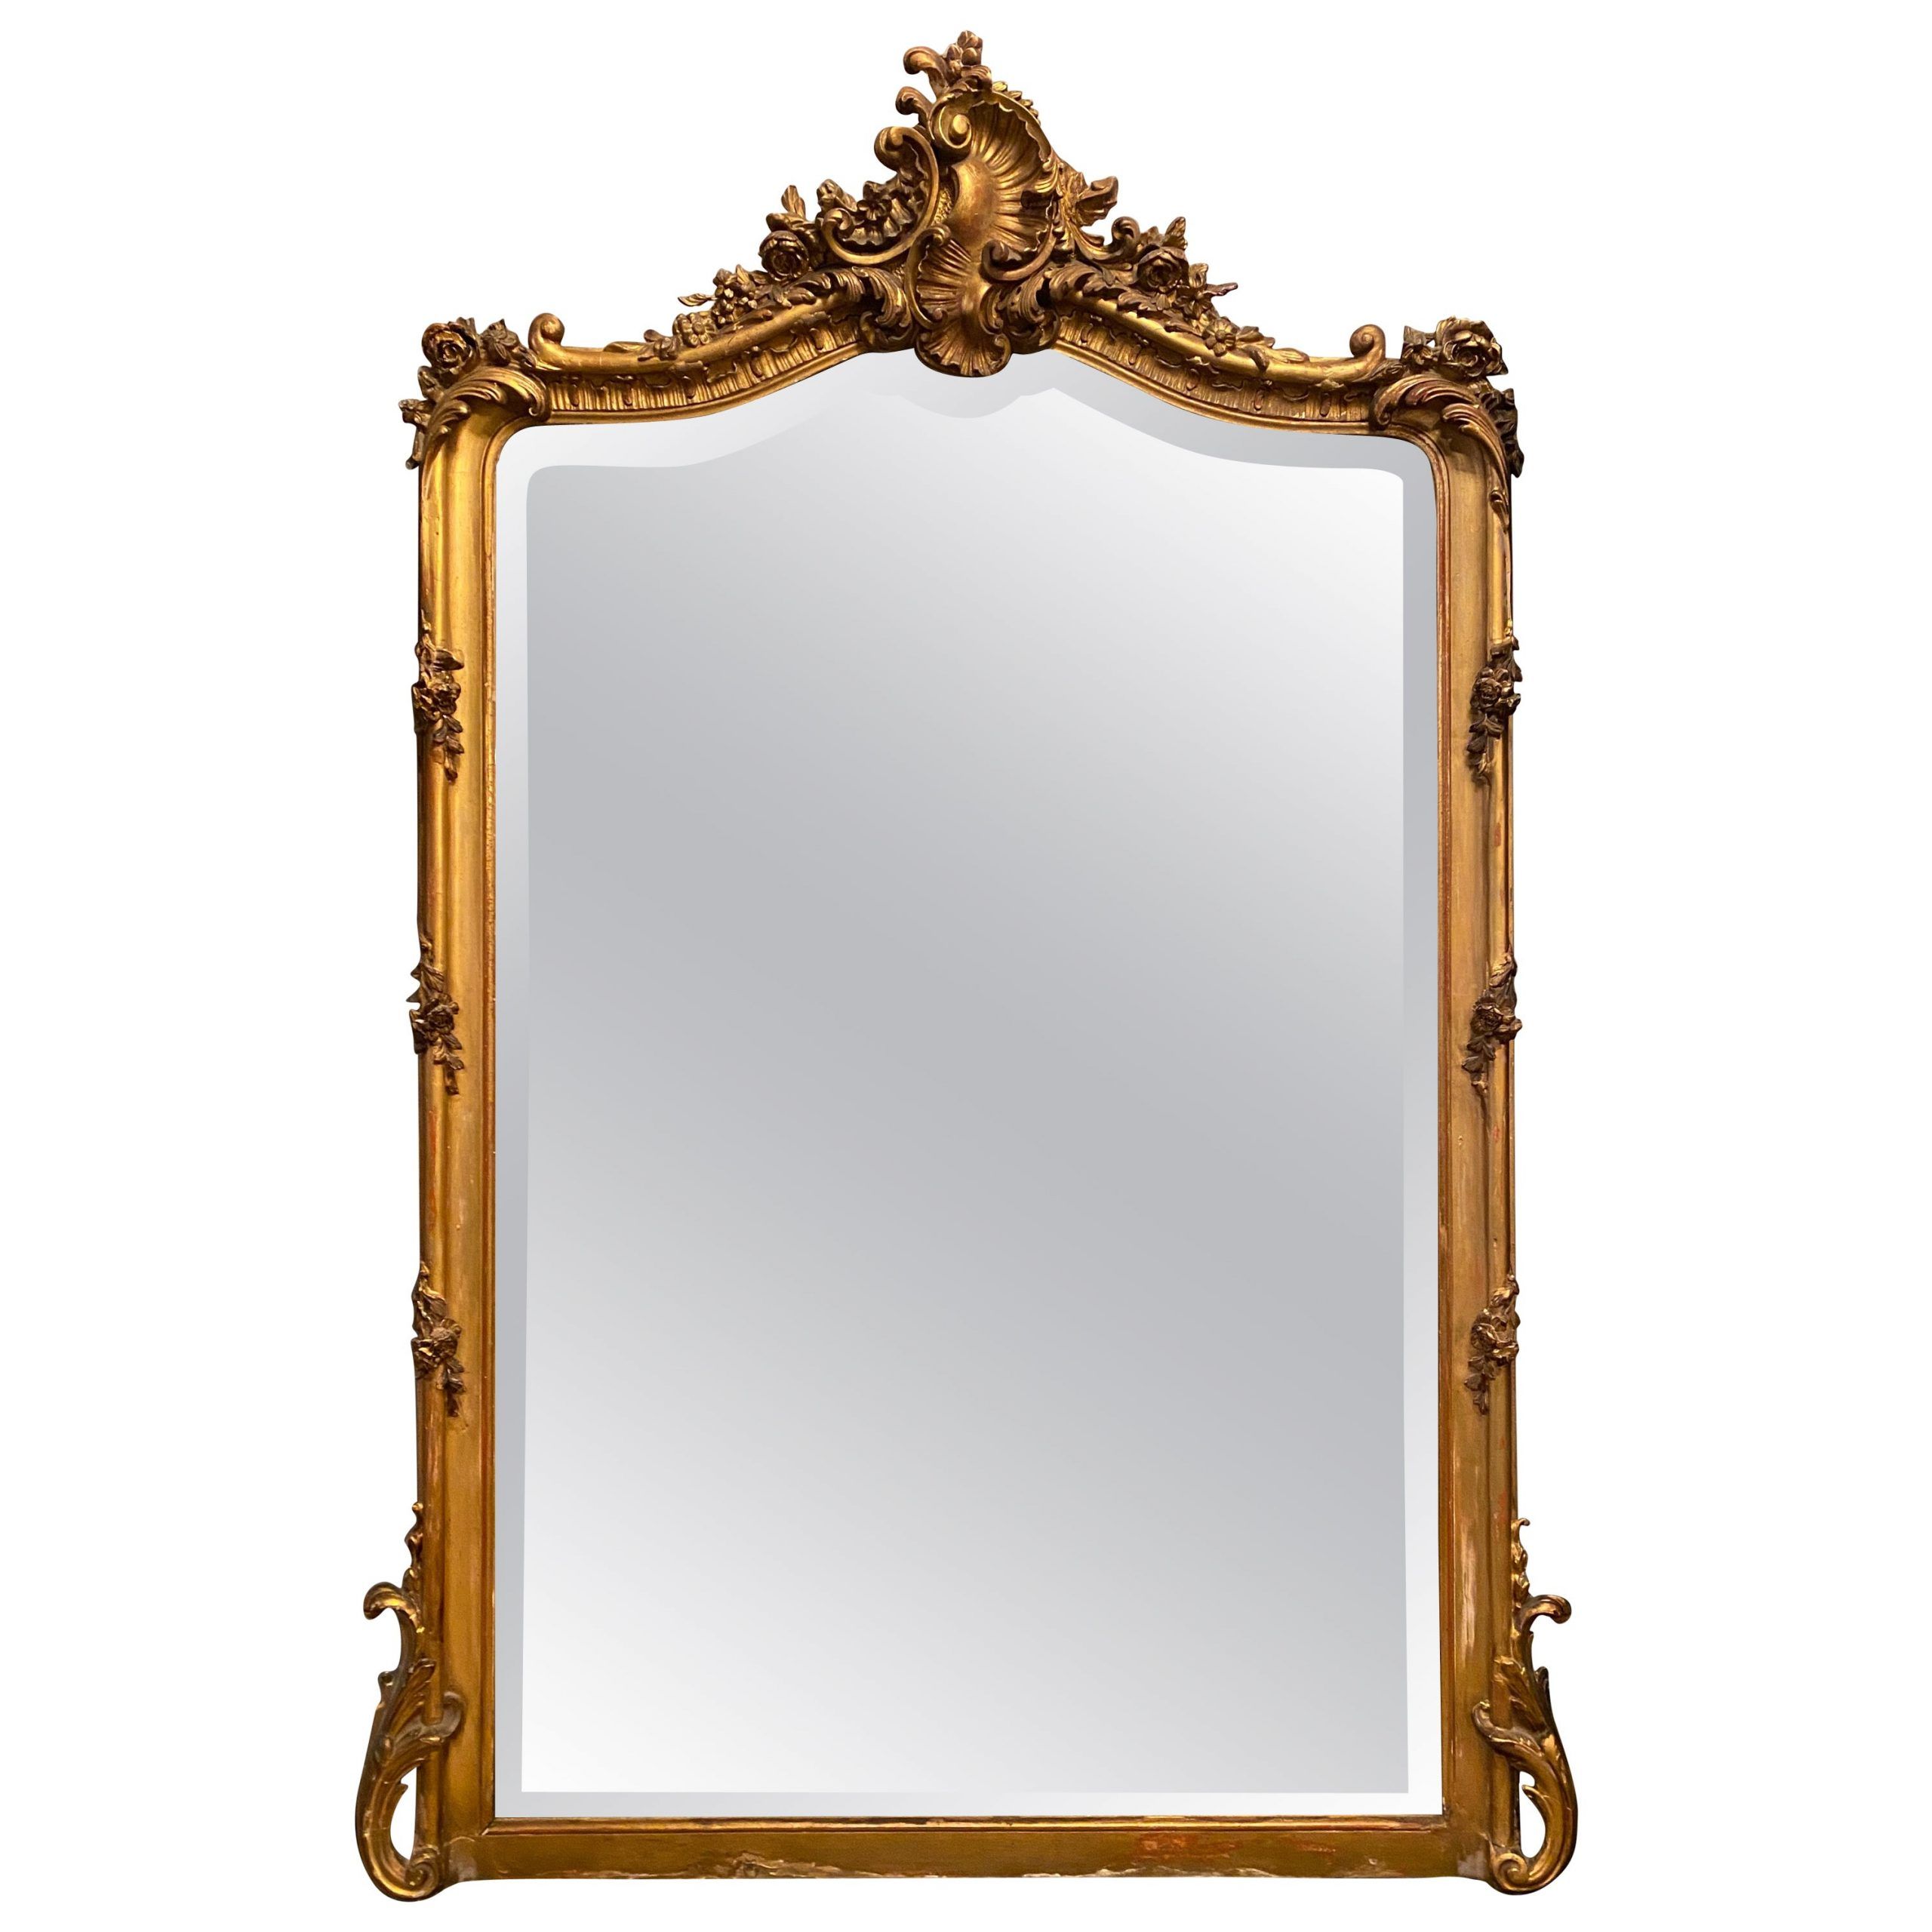 Antique French Gold Leaf Beveled Mirror, Circa 1855 1865 At 1stdibs Inside Antique Gold Leaf Round Oversized Wall Mirrors (View 10 of 15)